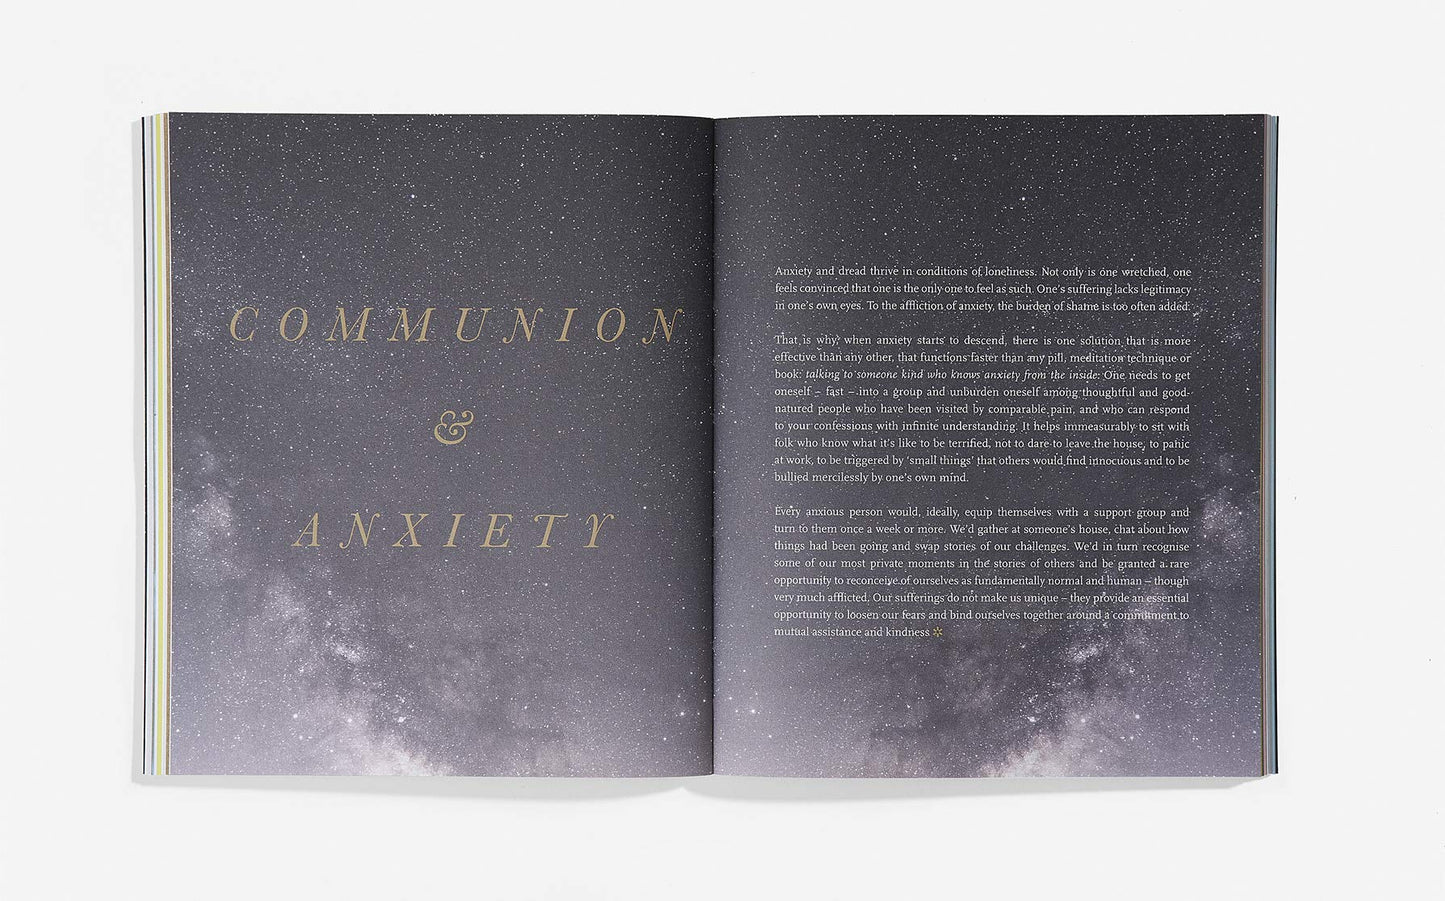 Anxiety: Meditations on the Anxious Mind